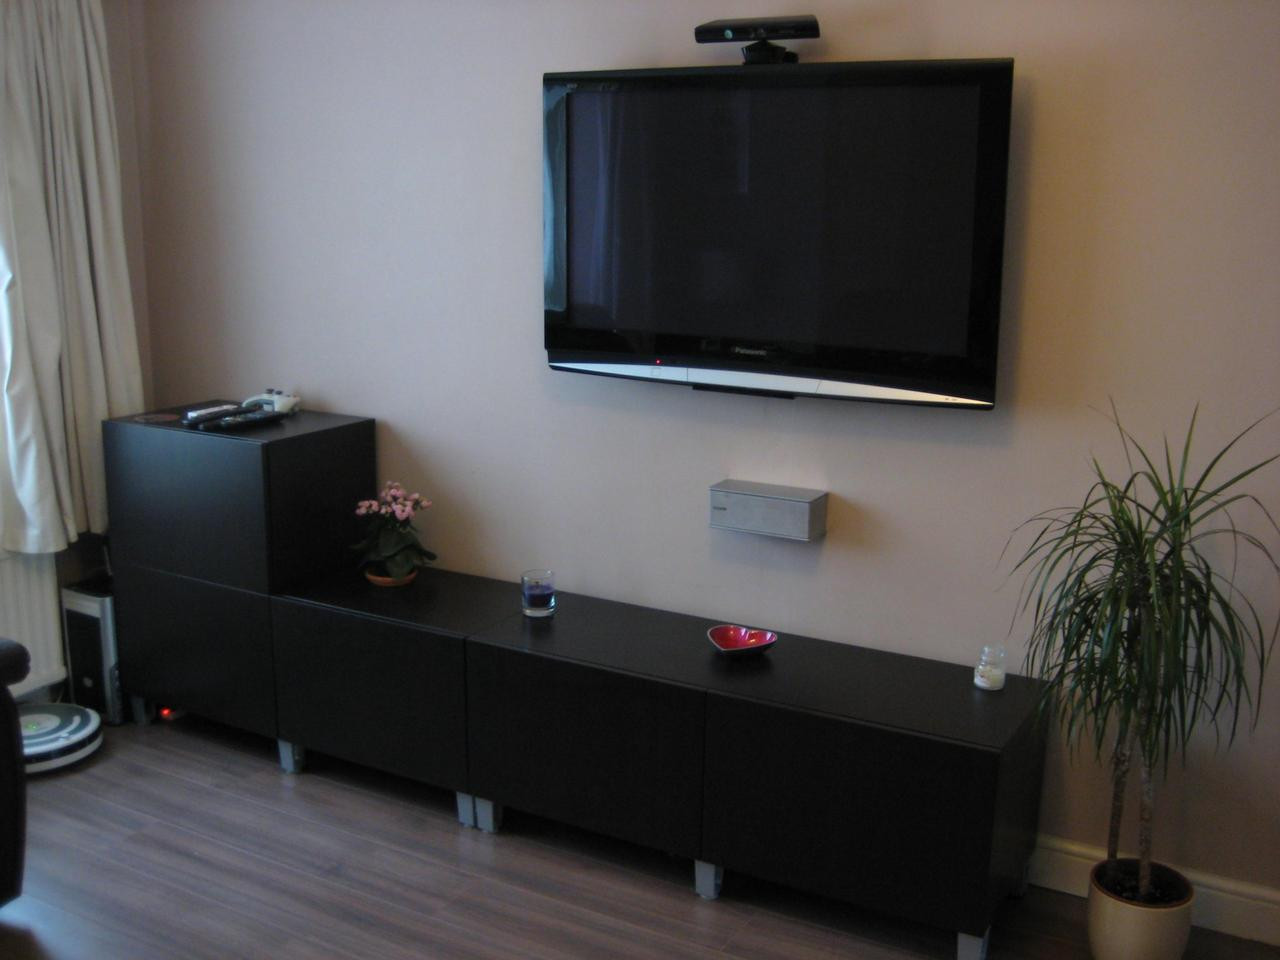 Bedroom Tv Wall Mount
 Mounted TV Ideas How to Decorate Them Beautifully – HomesFeed